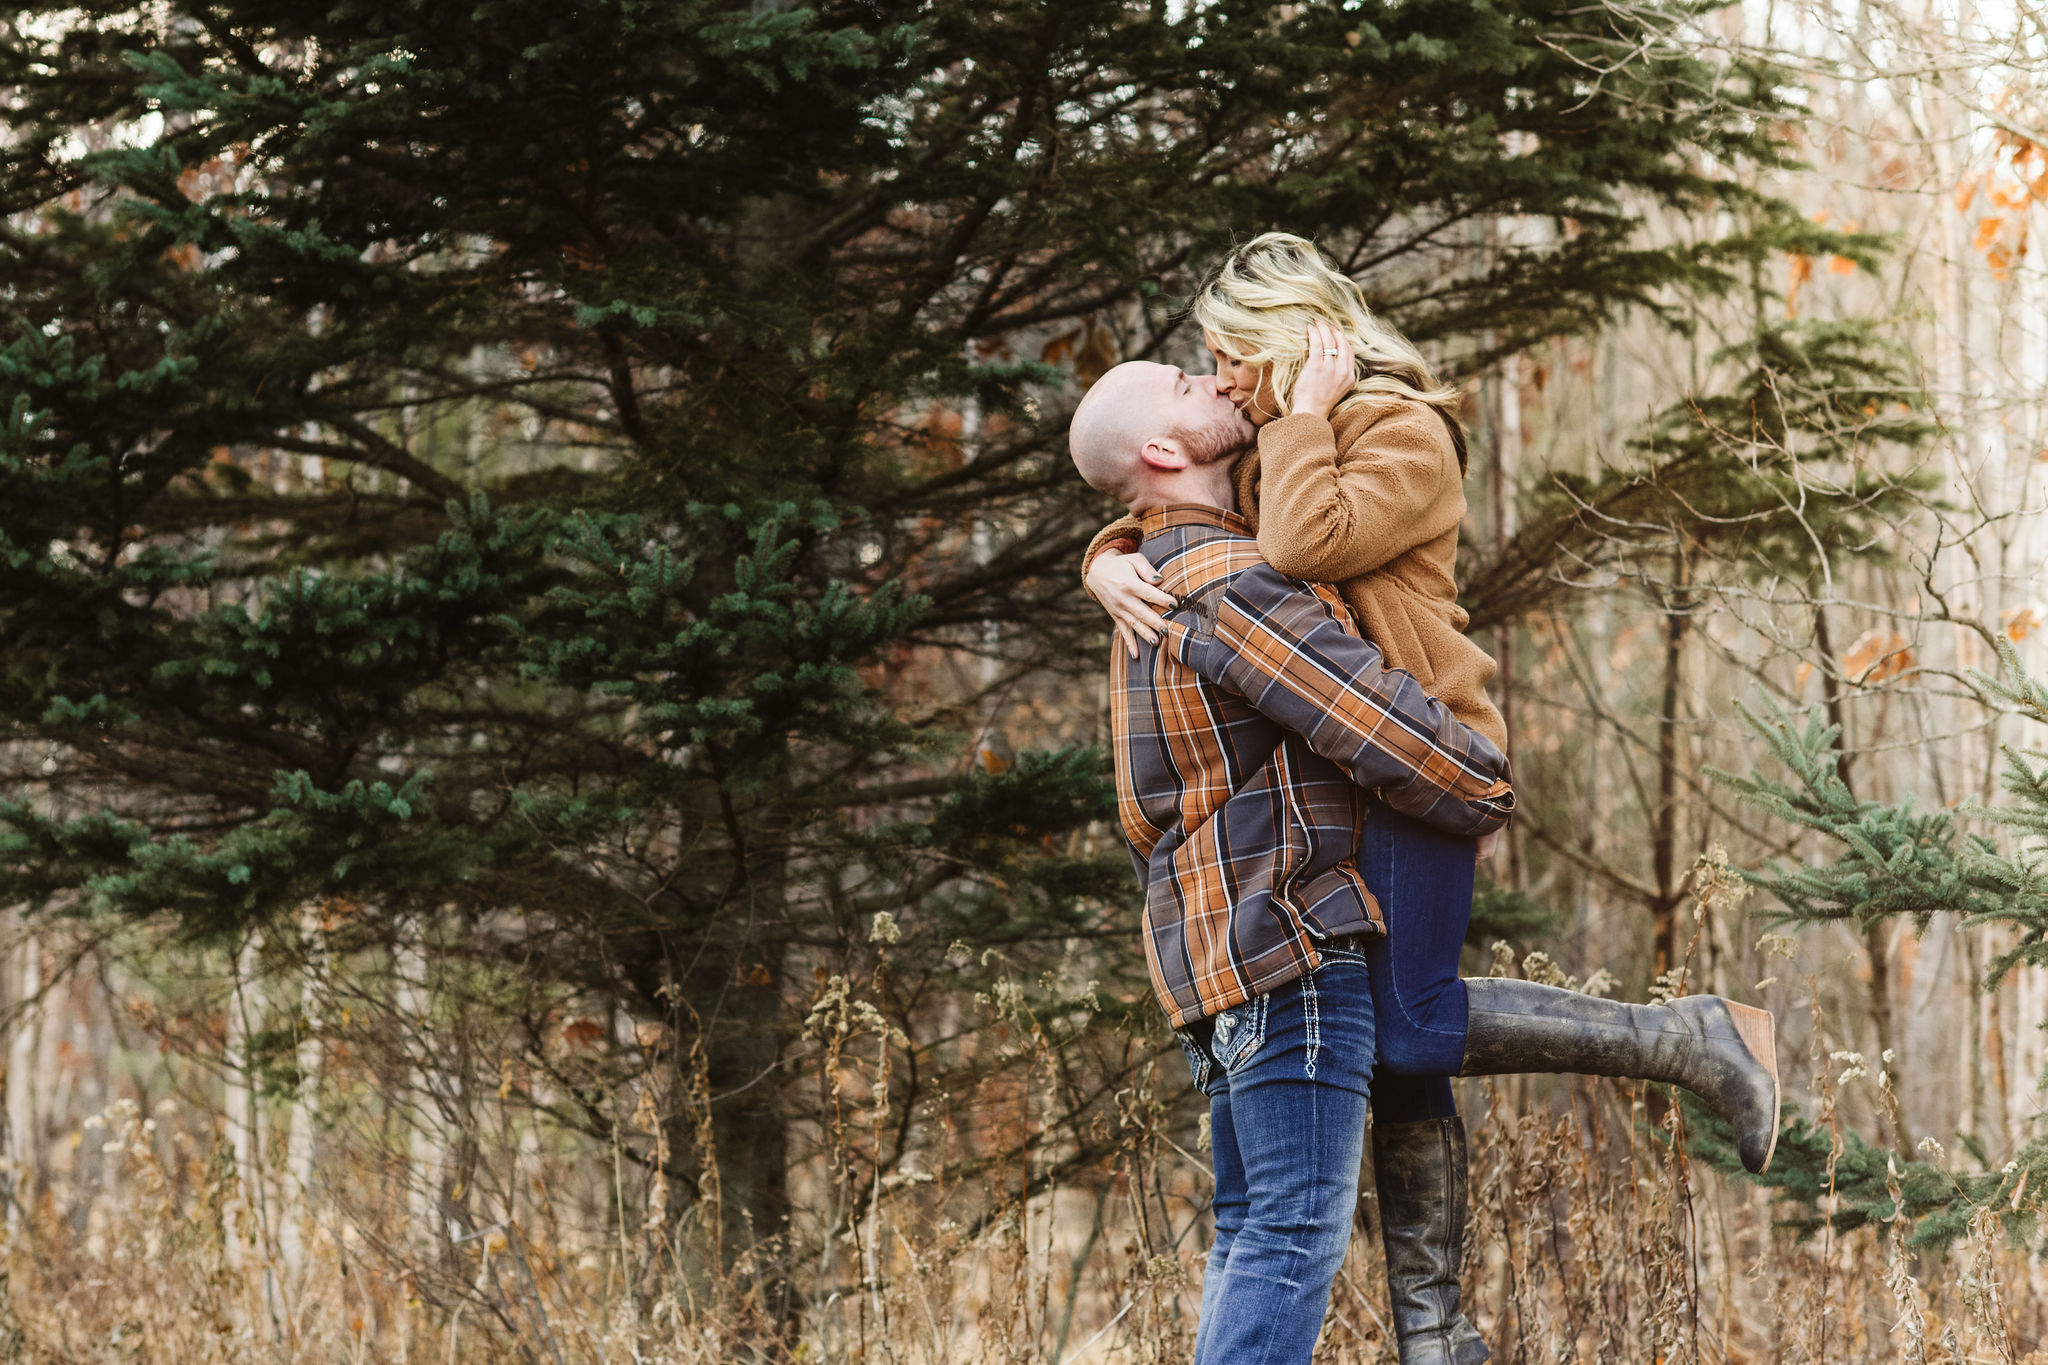 A man lifts his wife up for a kiss during their family photo session. There is a pine tree in the background, and some golden dried grasses around it. They are both wearing jeans and a casual top.